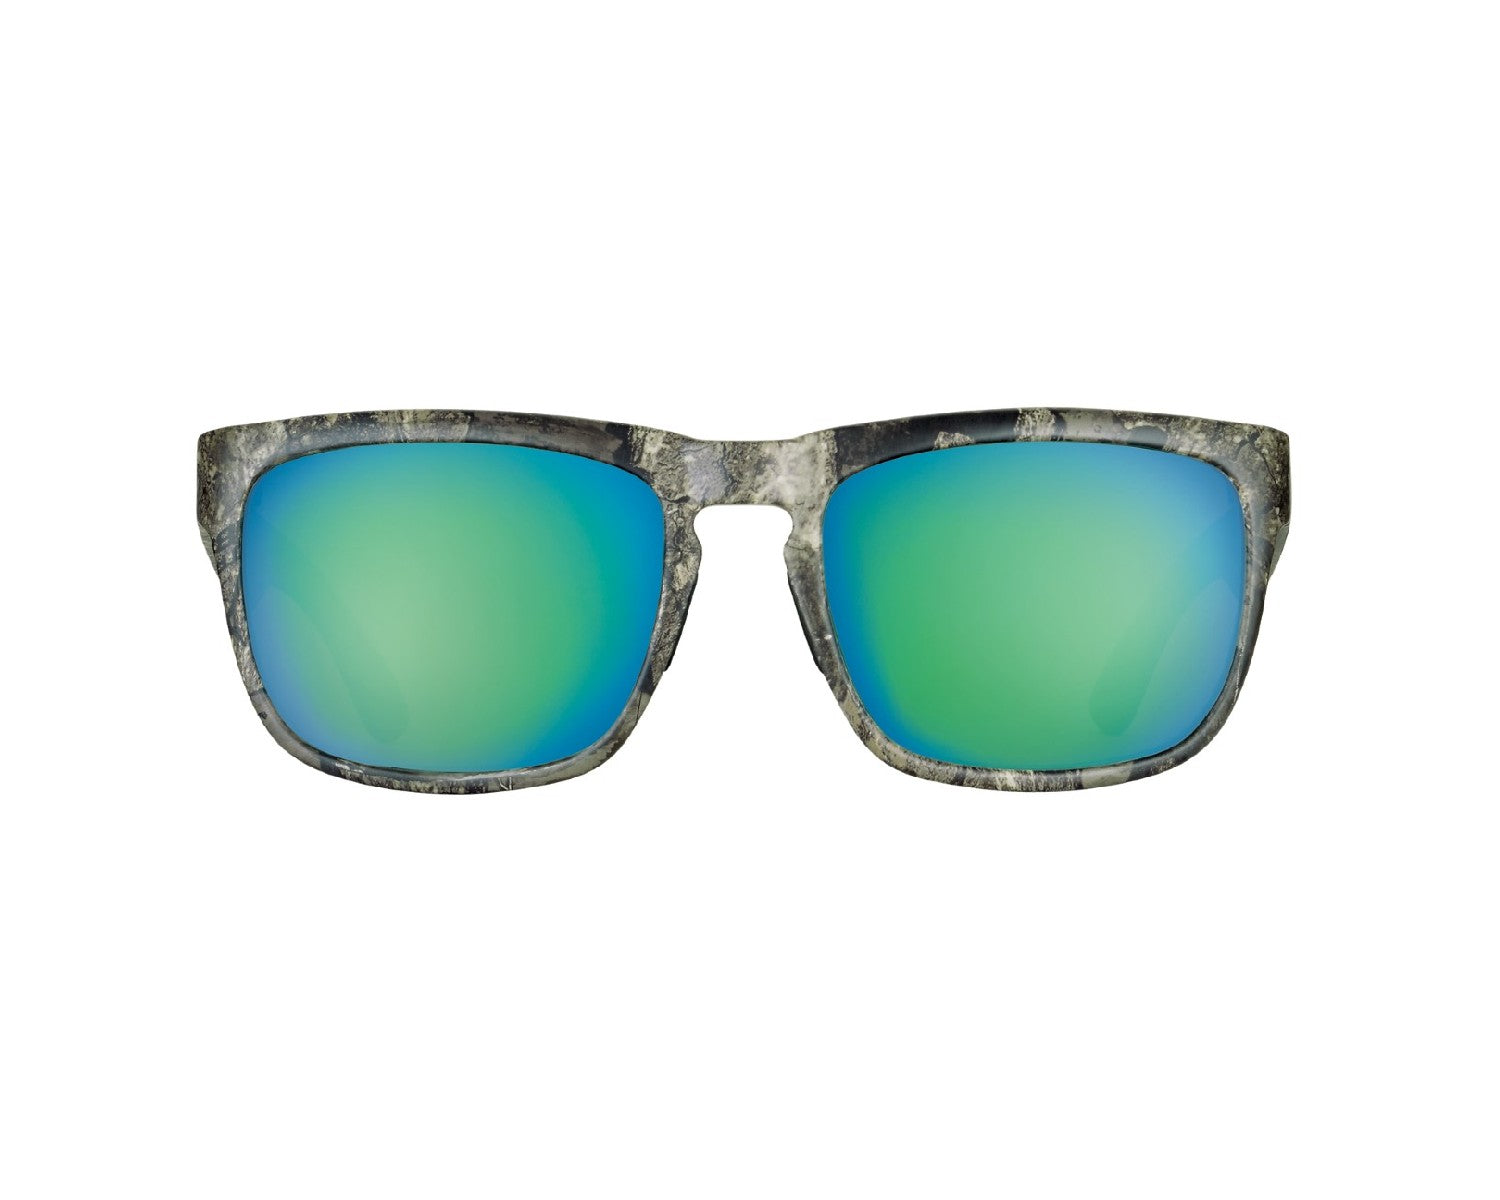 Cumberland | Realtree Timber Palm Green | Blue Otter Polarized